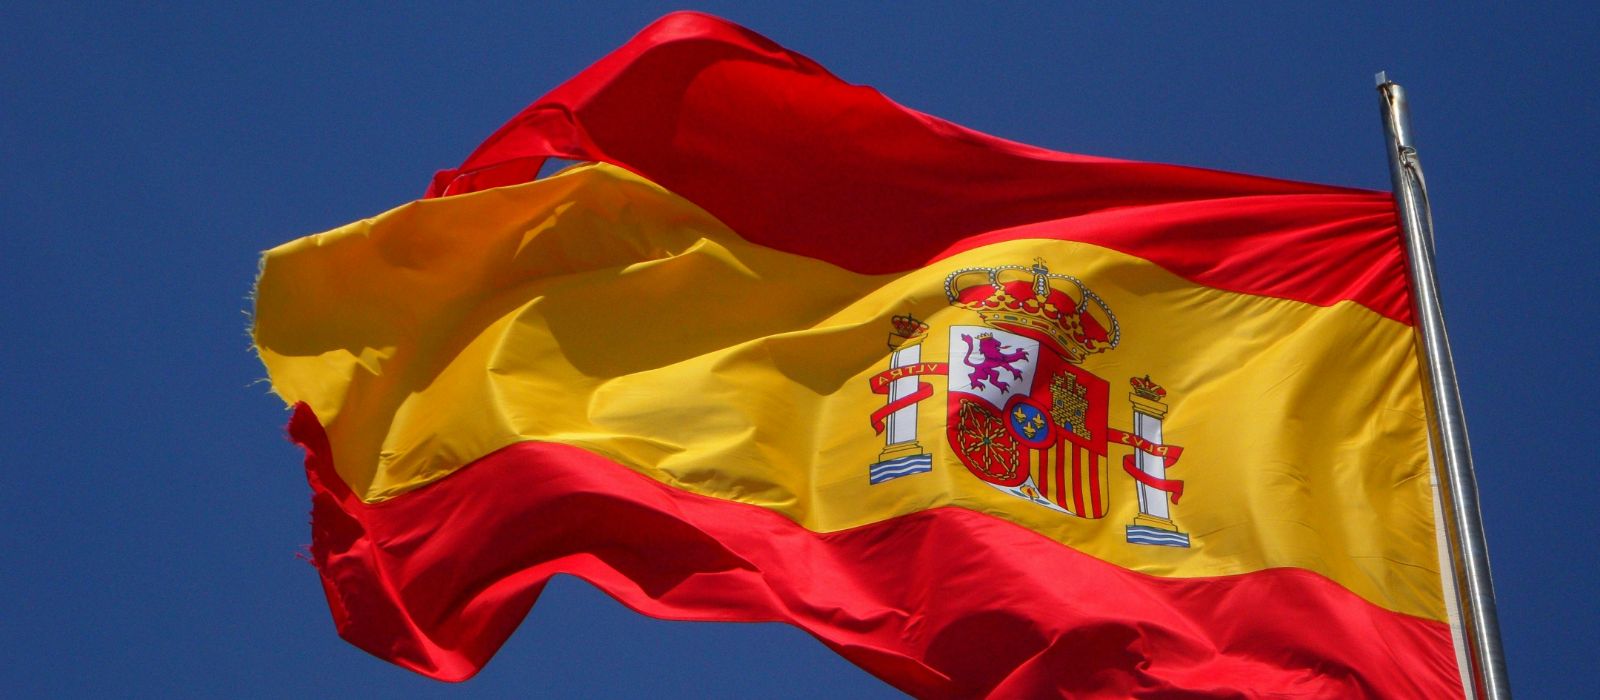 How to Get an Internship in Spain